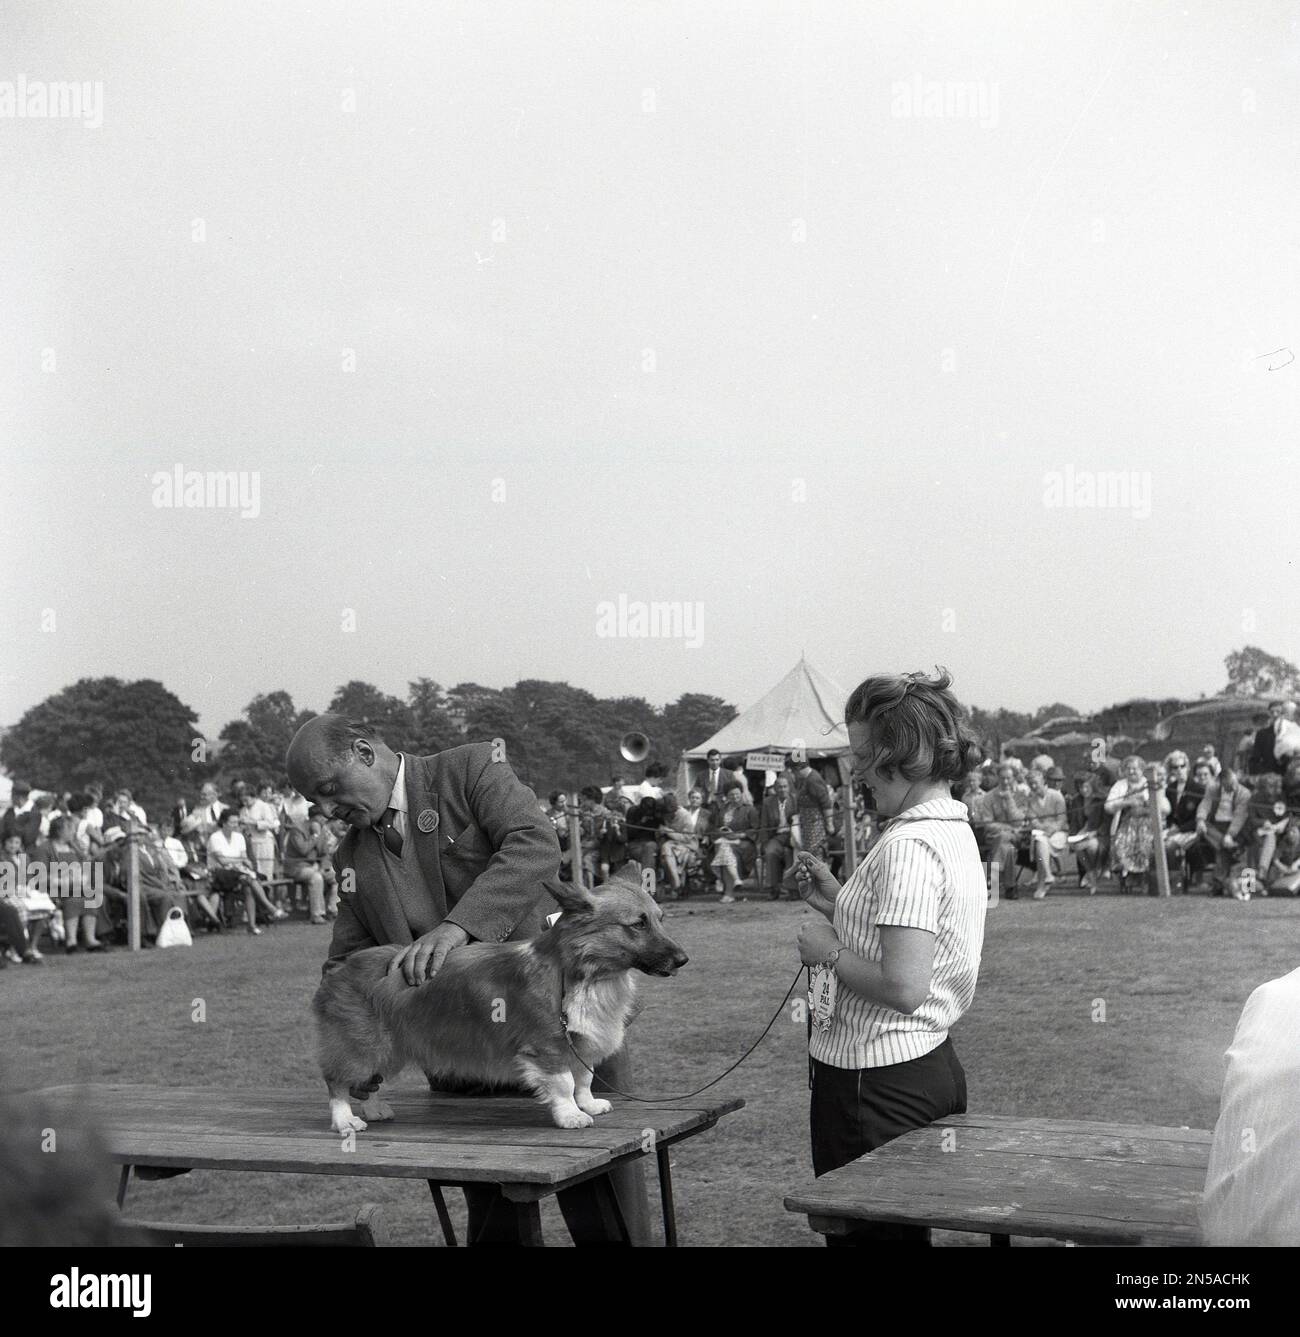 1963, historical, a judge inspecting a lady's small dog, at a dog show, England, UK. Stock Photo